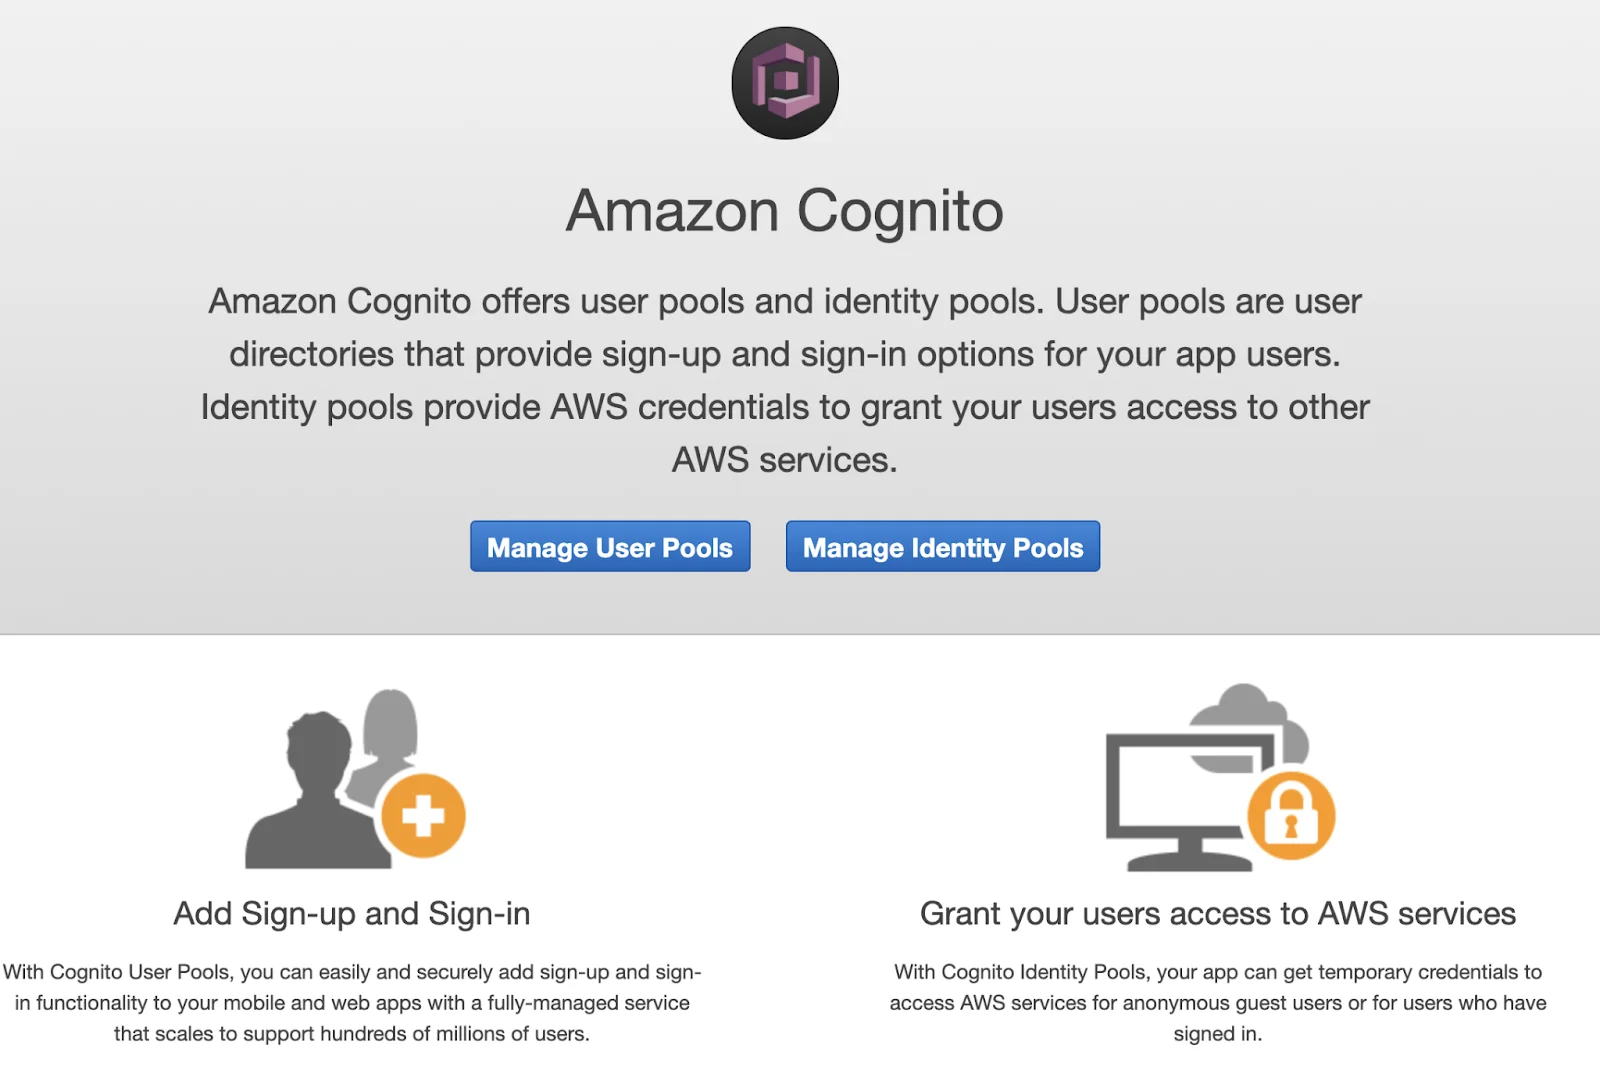 How to Build SSO solution on top of Amazon Cognito